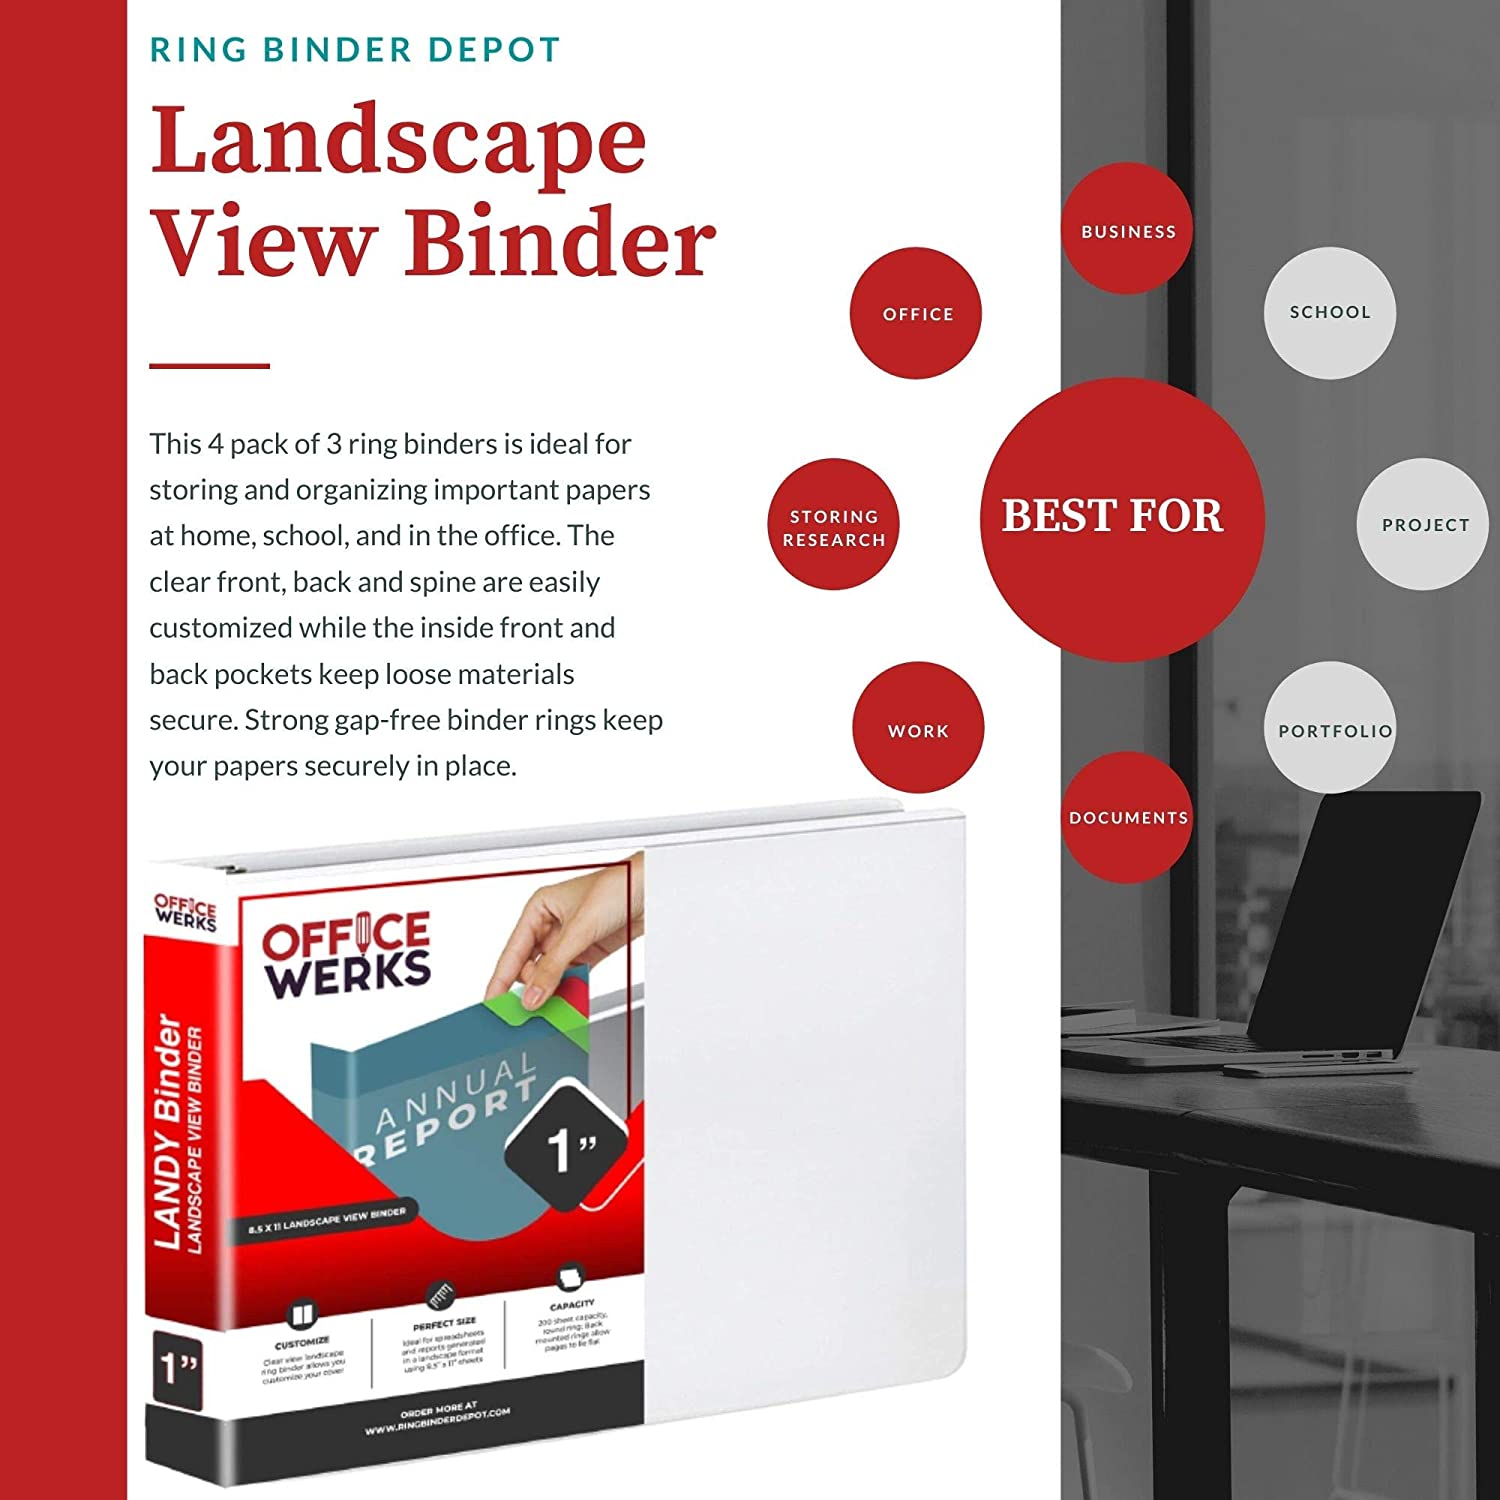 Landscape View Binder, 8.5" X 11", 1 Inch Round Ring, Back Mount, White - Pack of 4